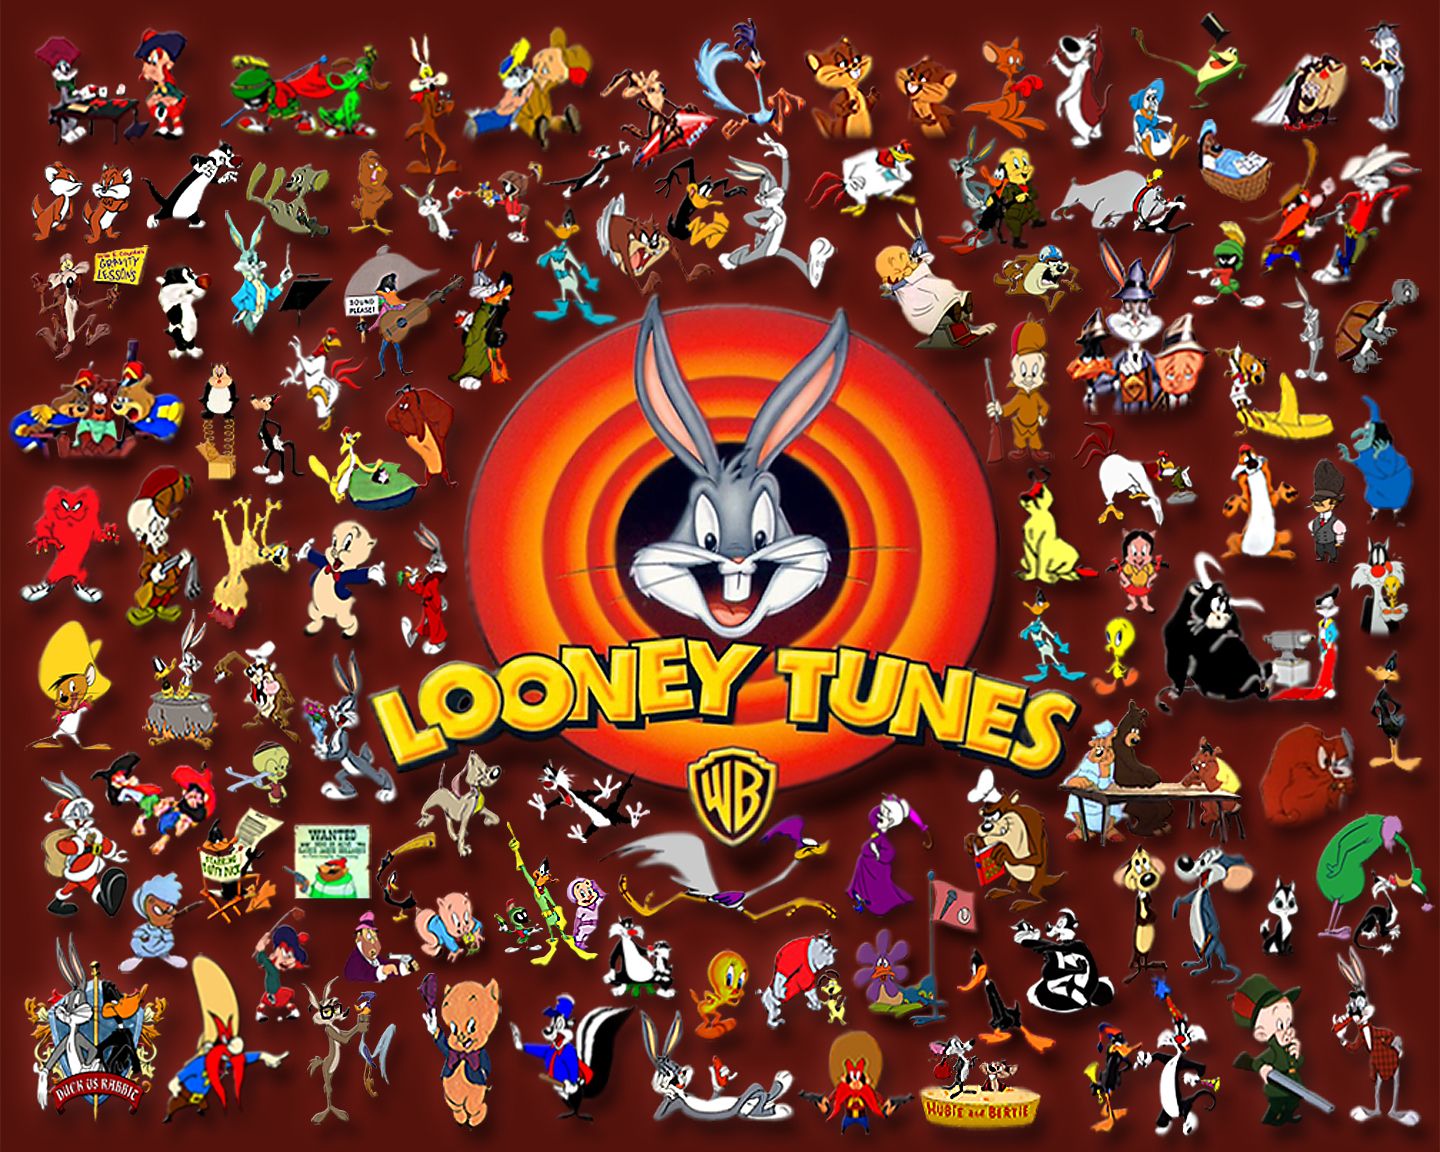 Looney Tunes Collage Brothers Animation Wallpaper. Looney Tunes Wallpaper, Looney Tunes Characters, Looney Tunes